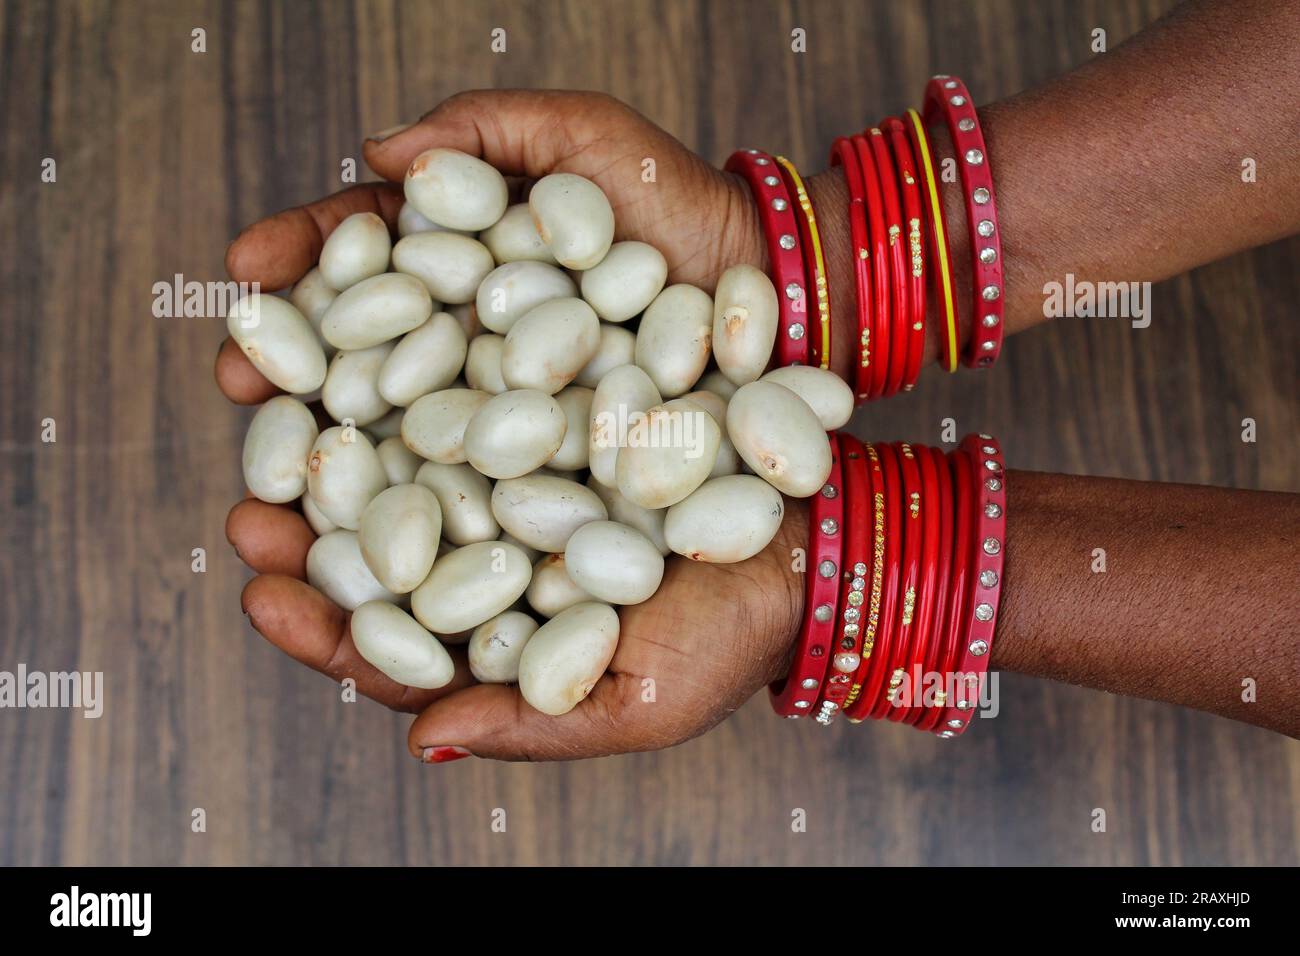 Holding some Jackfruit seeds in a hand top view Stock Photo